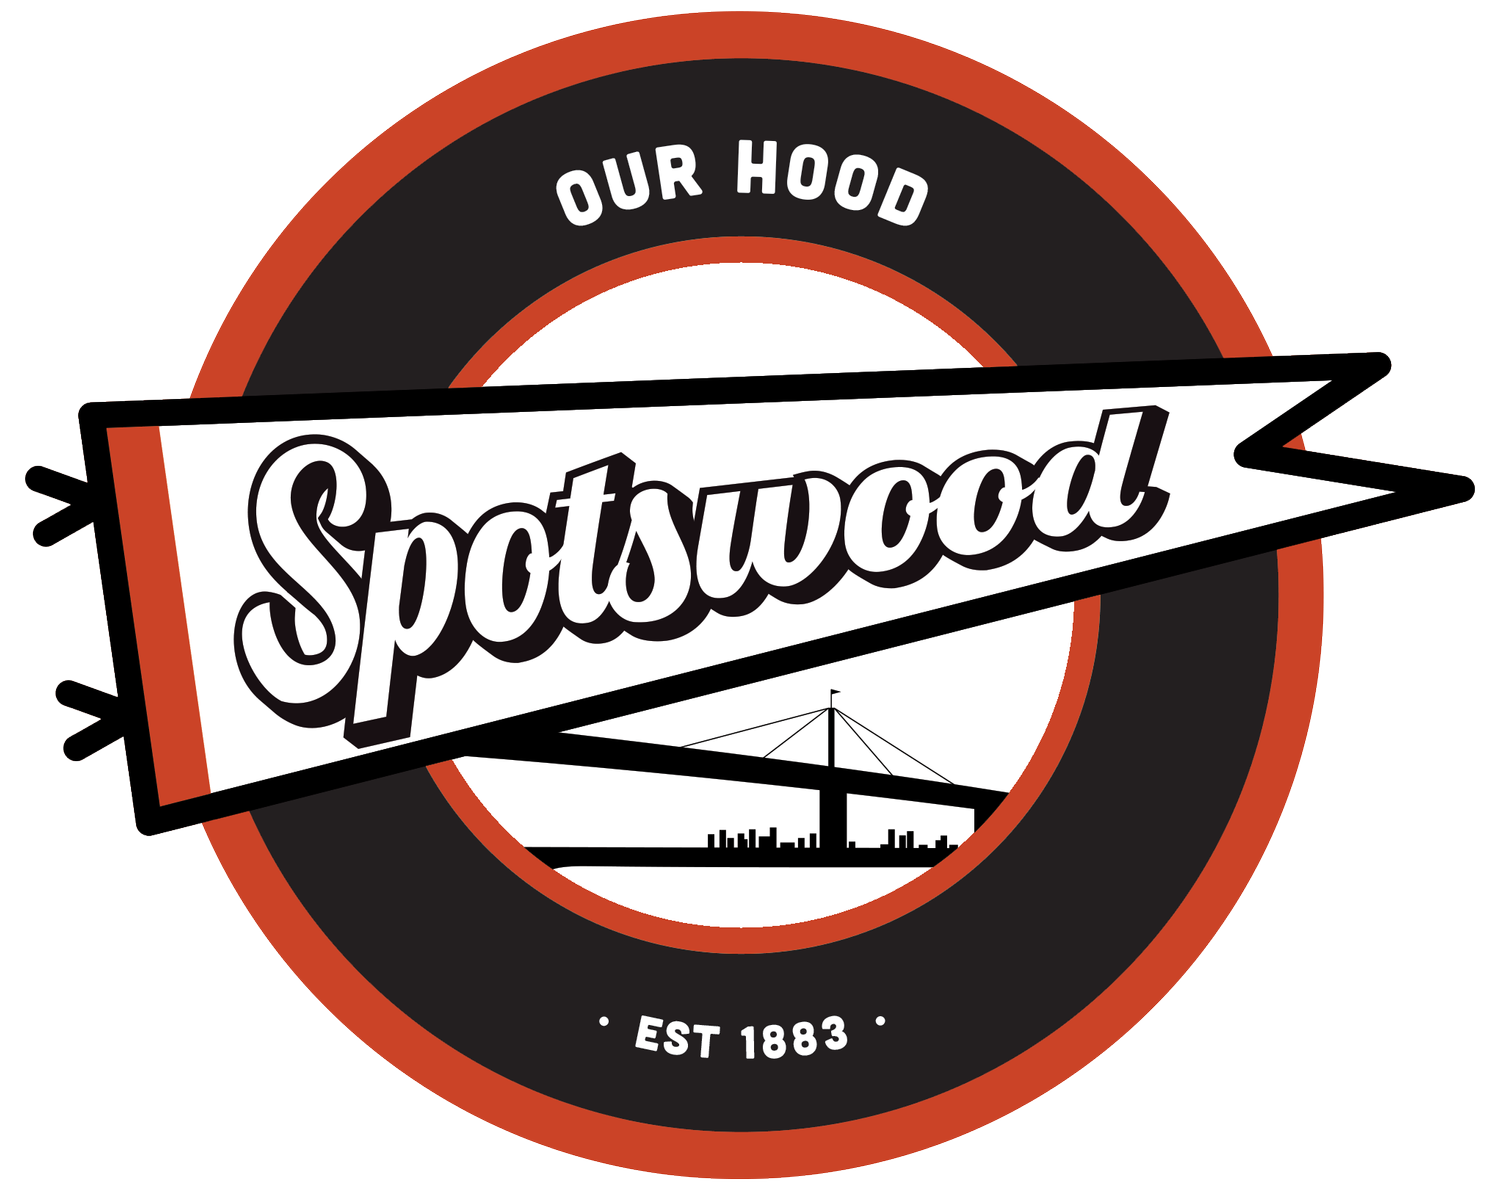 Our Hood Spotswood - Melbourne